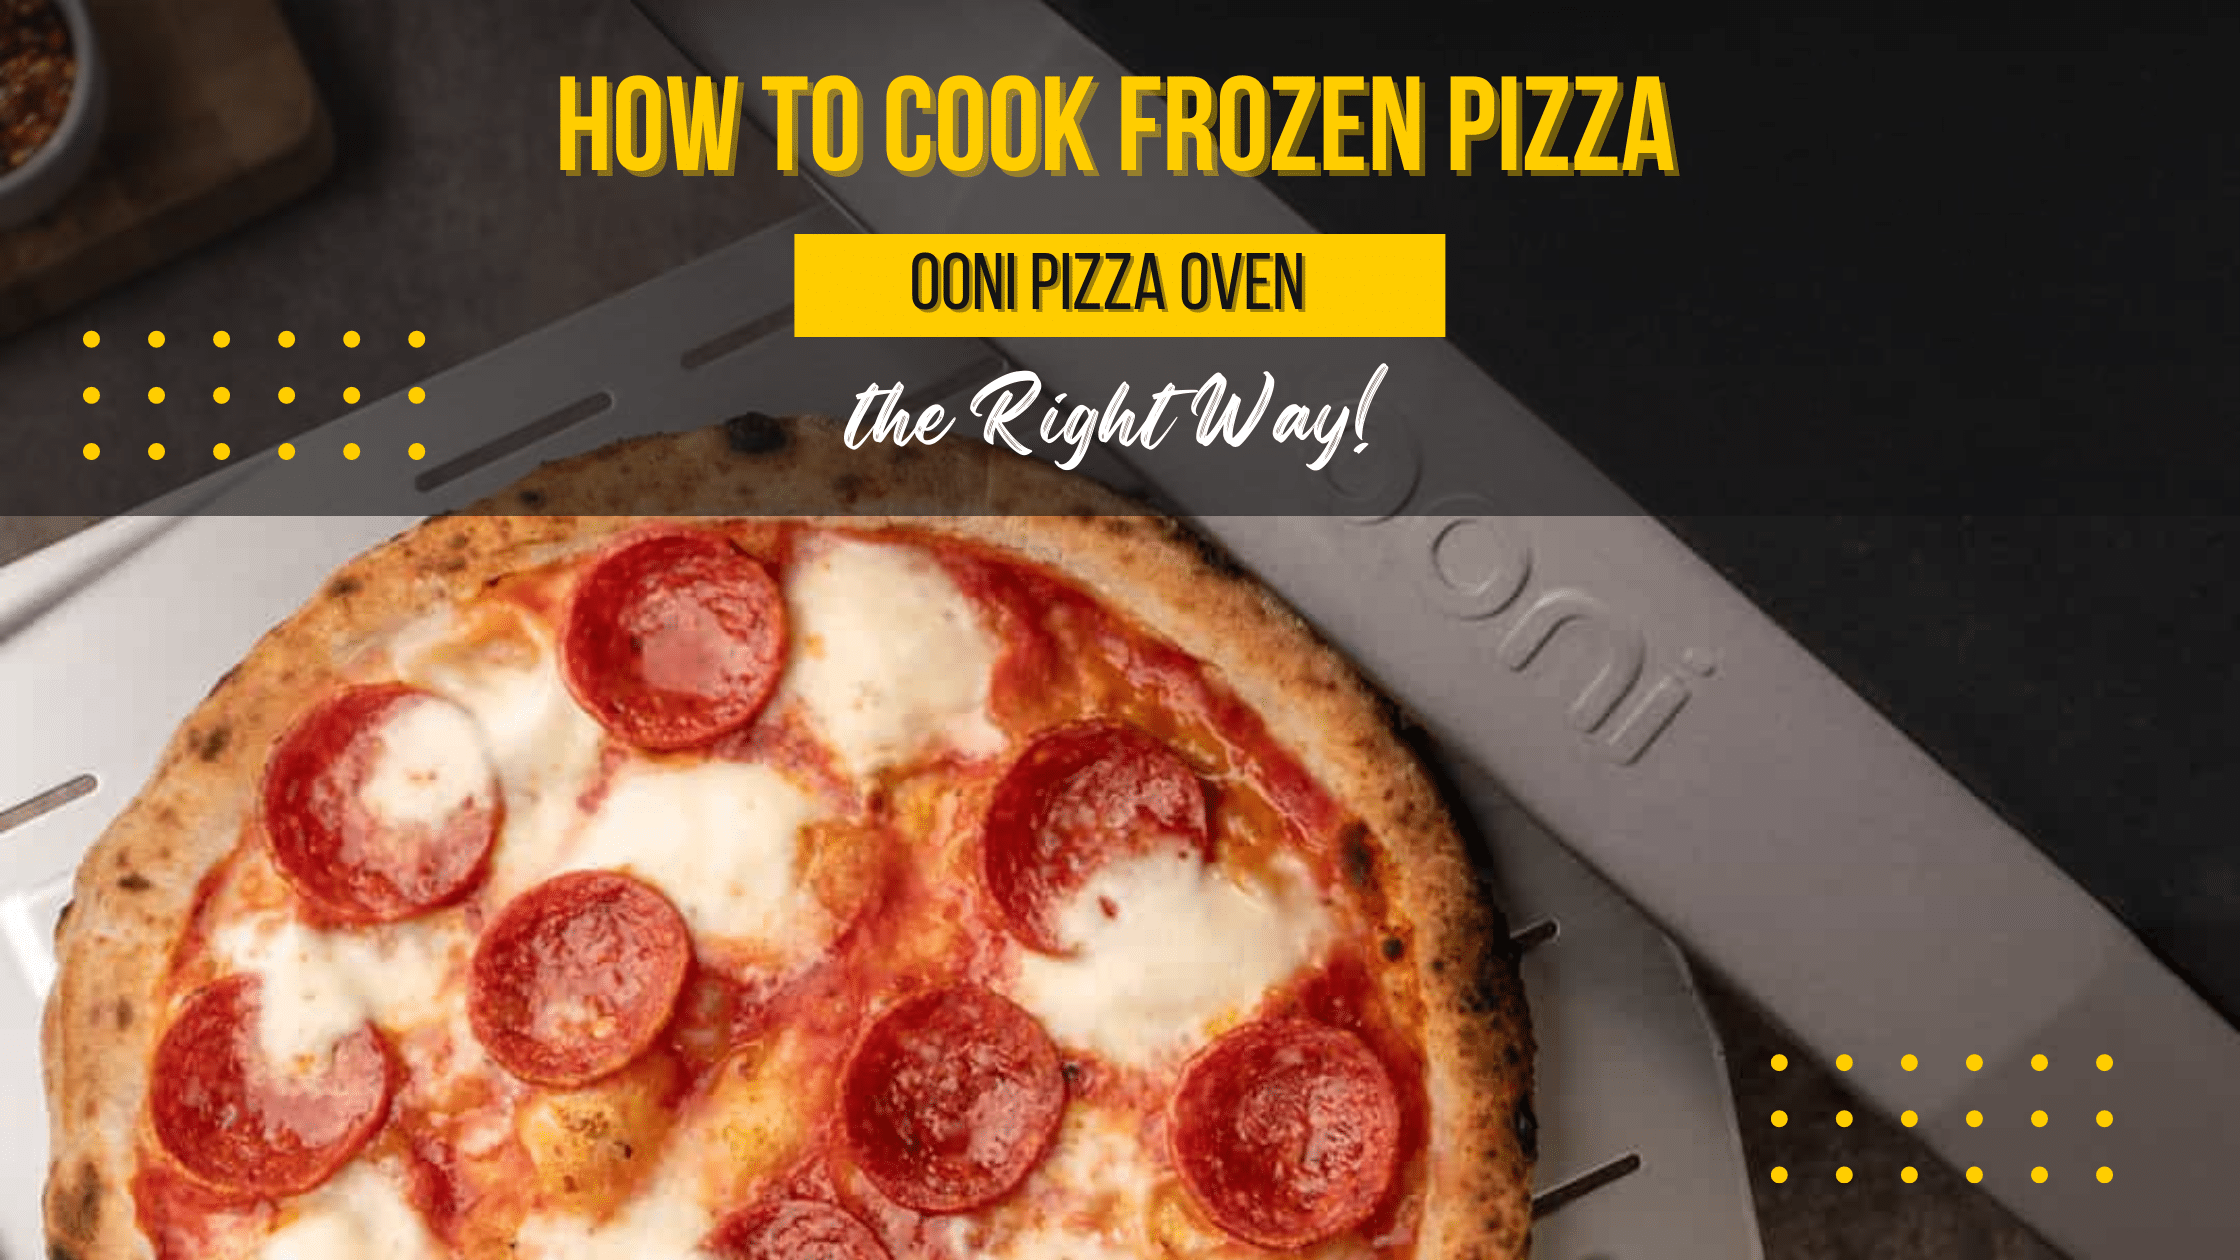 How to Cook Frozen Pizza in Ooni Pizza Oven (Step by Step)